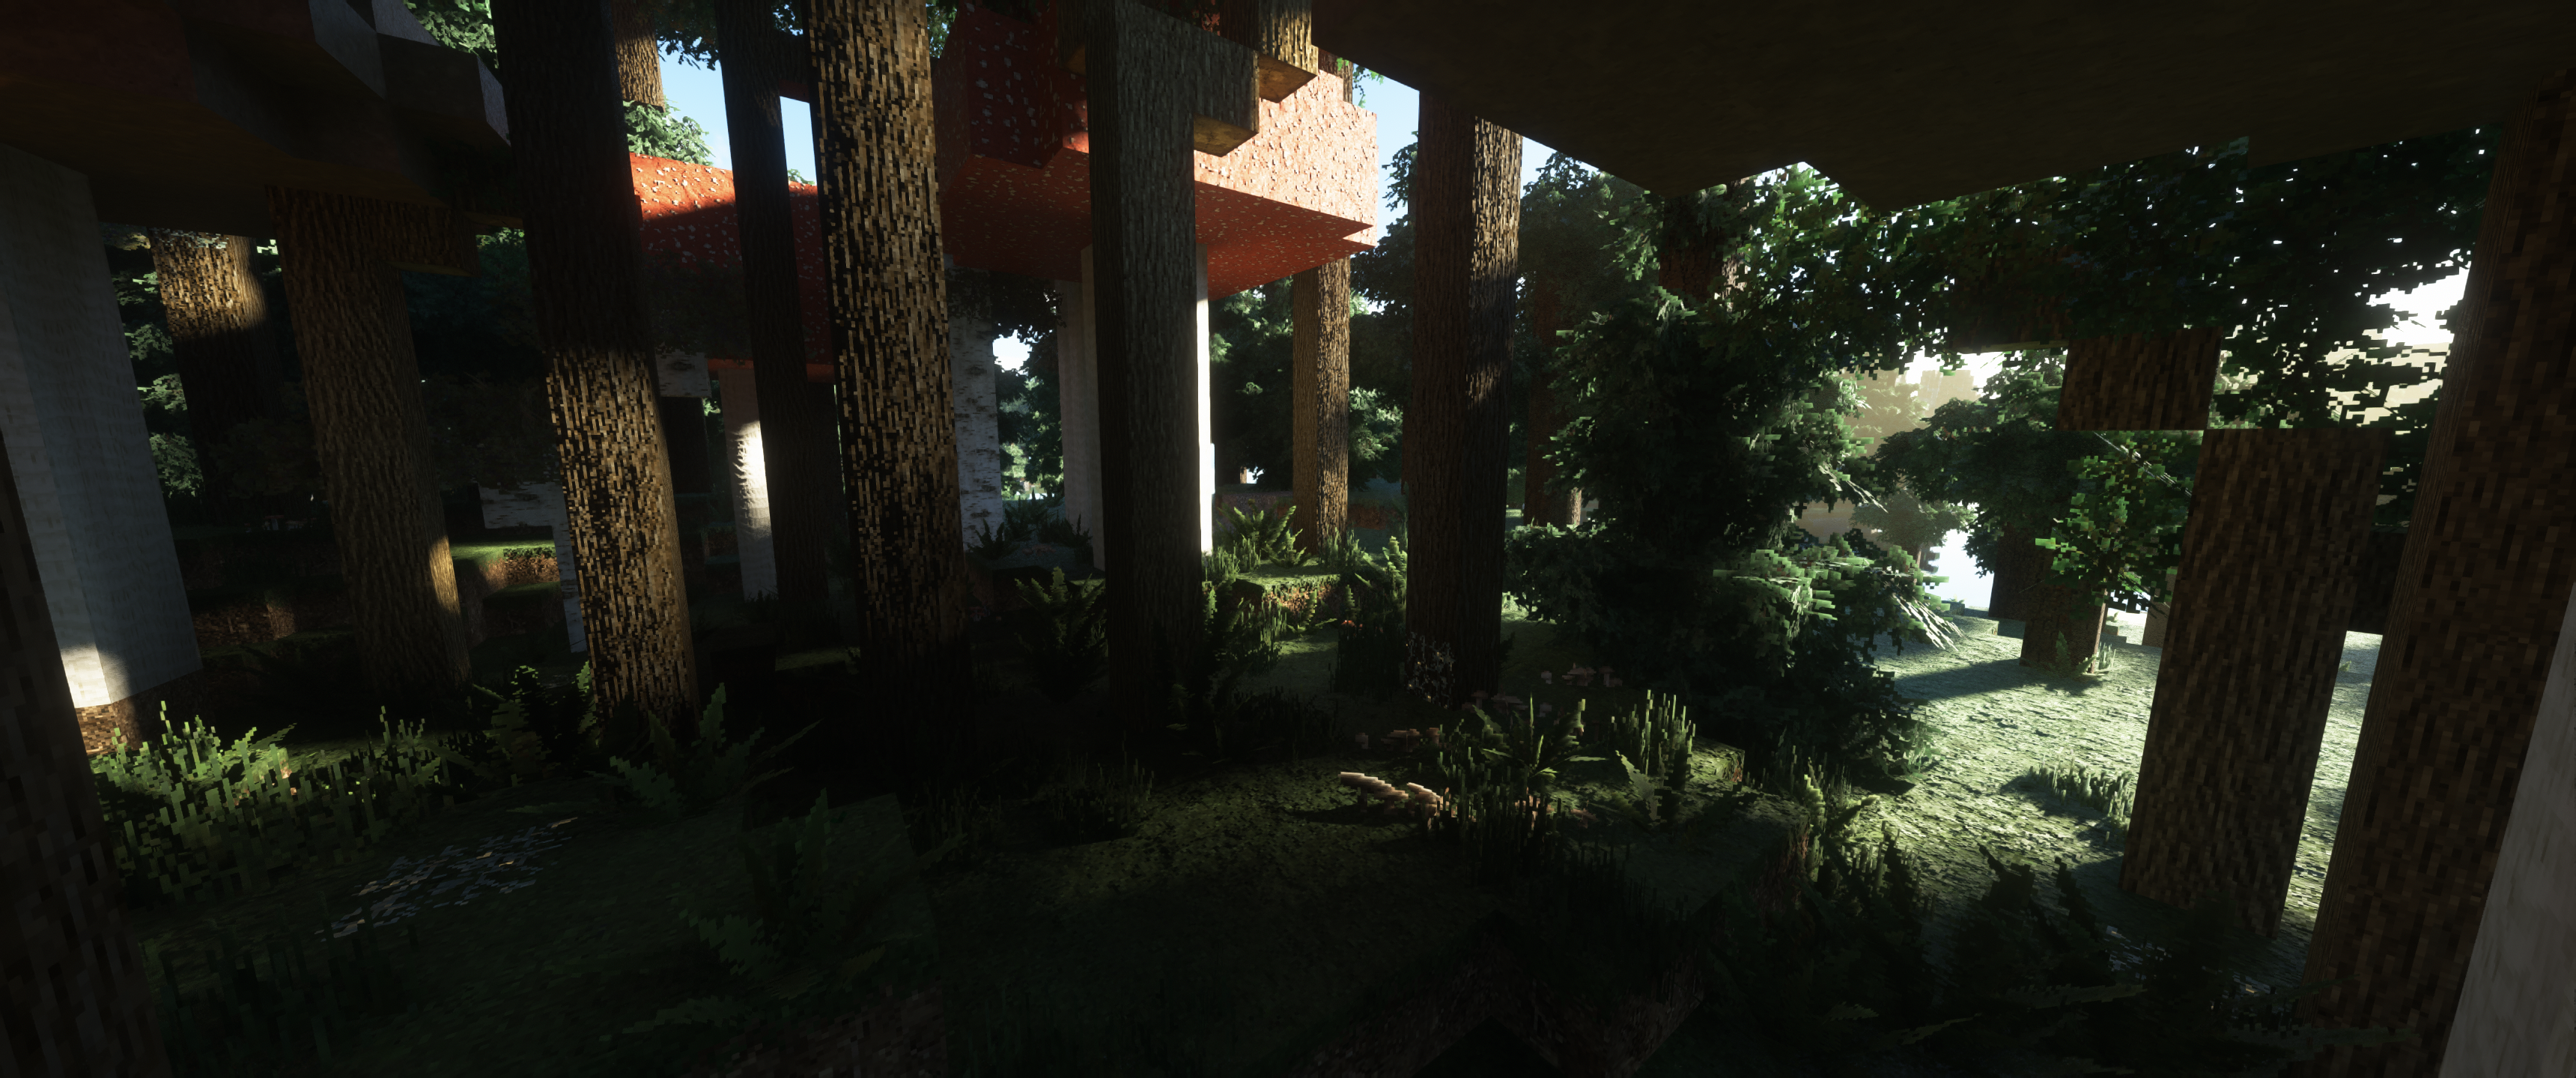 Minecraft Shaders Forest Video Games Video Game Landscape Mojang 3440x1440